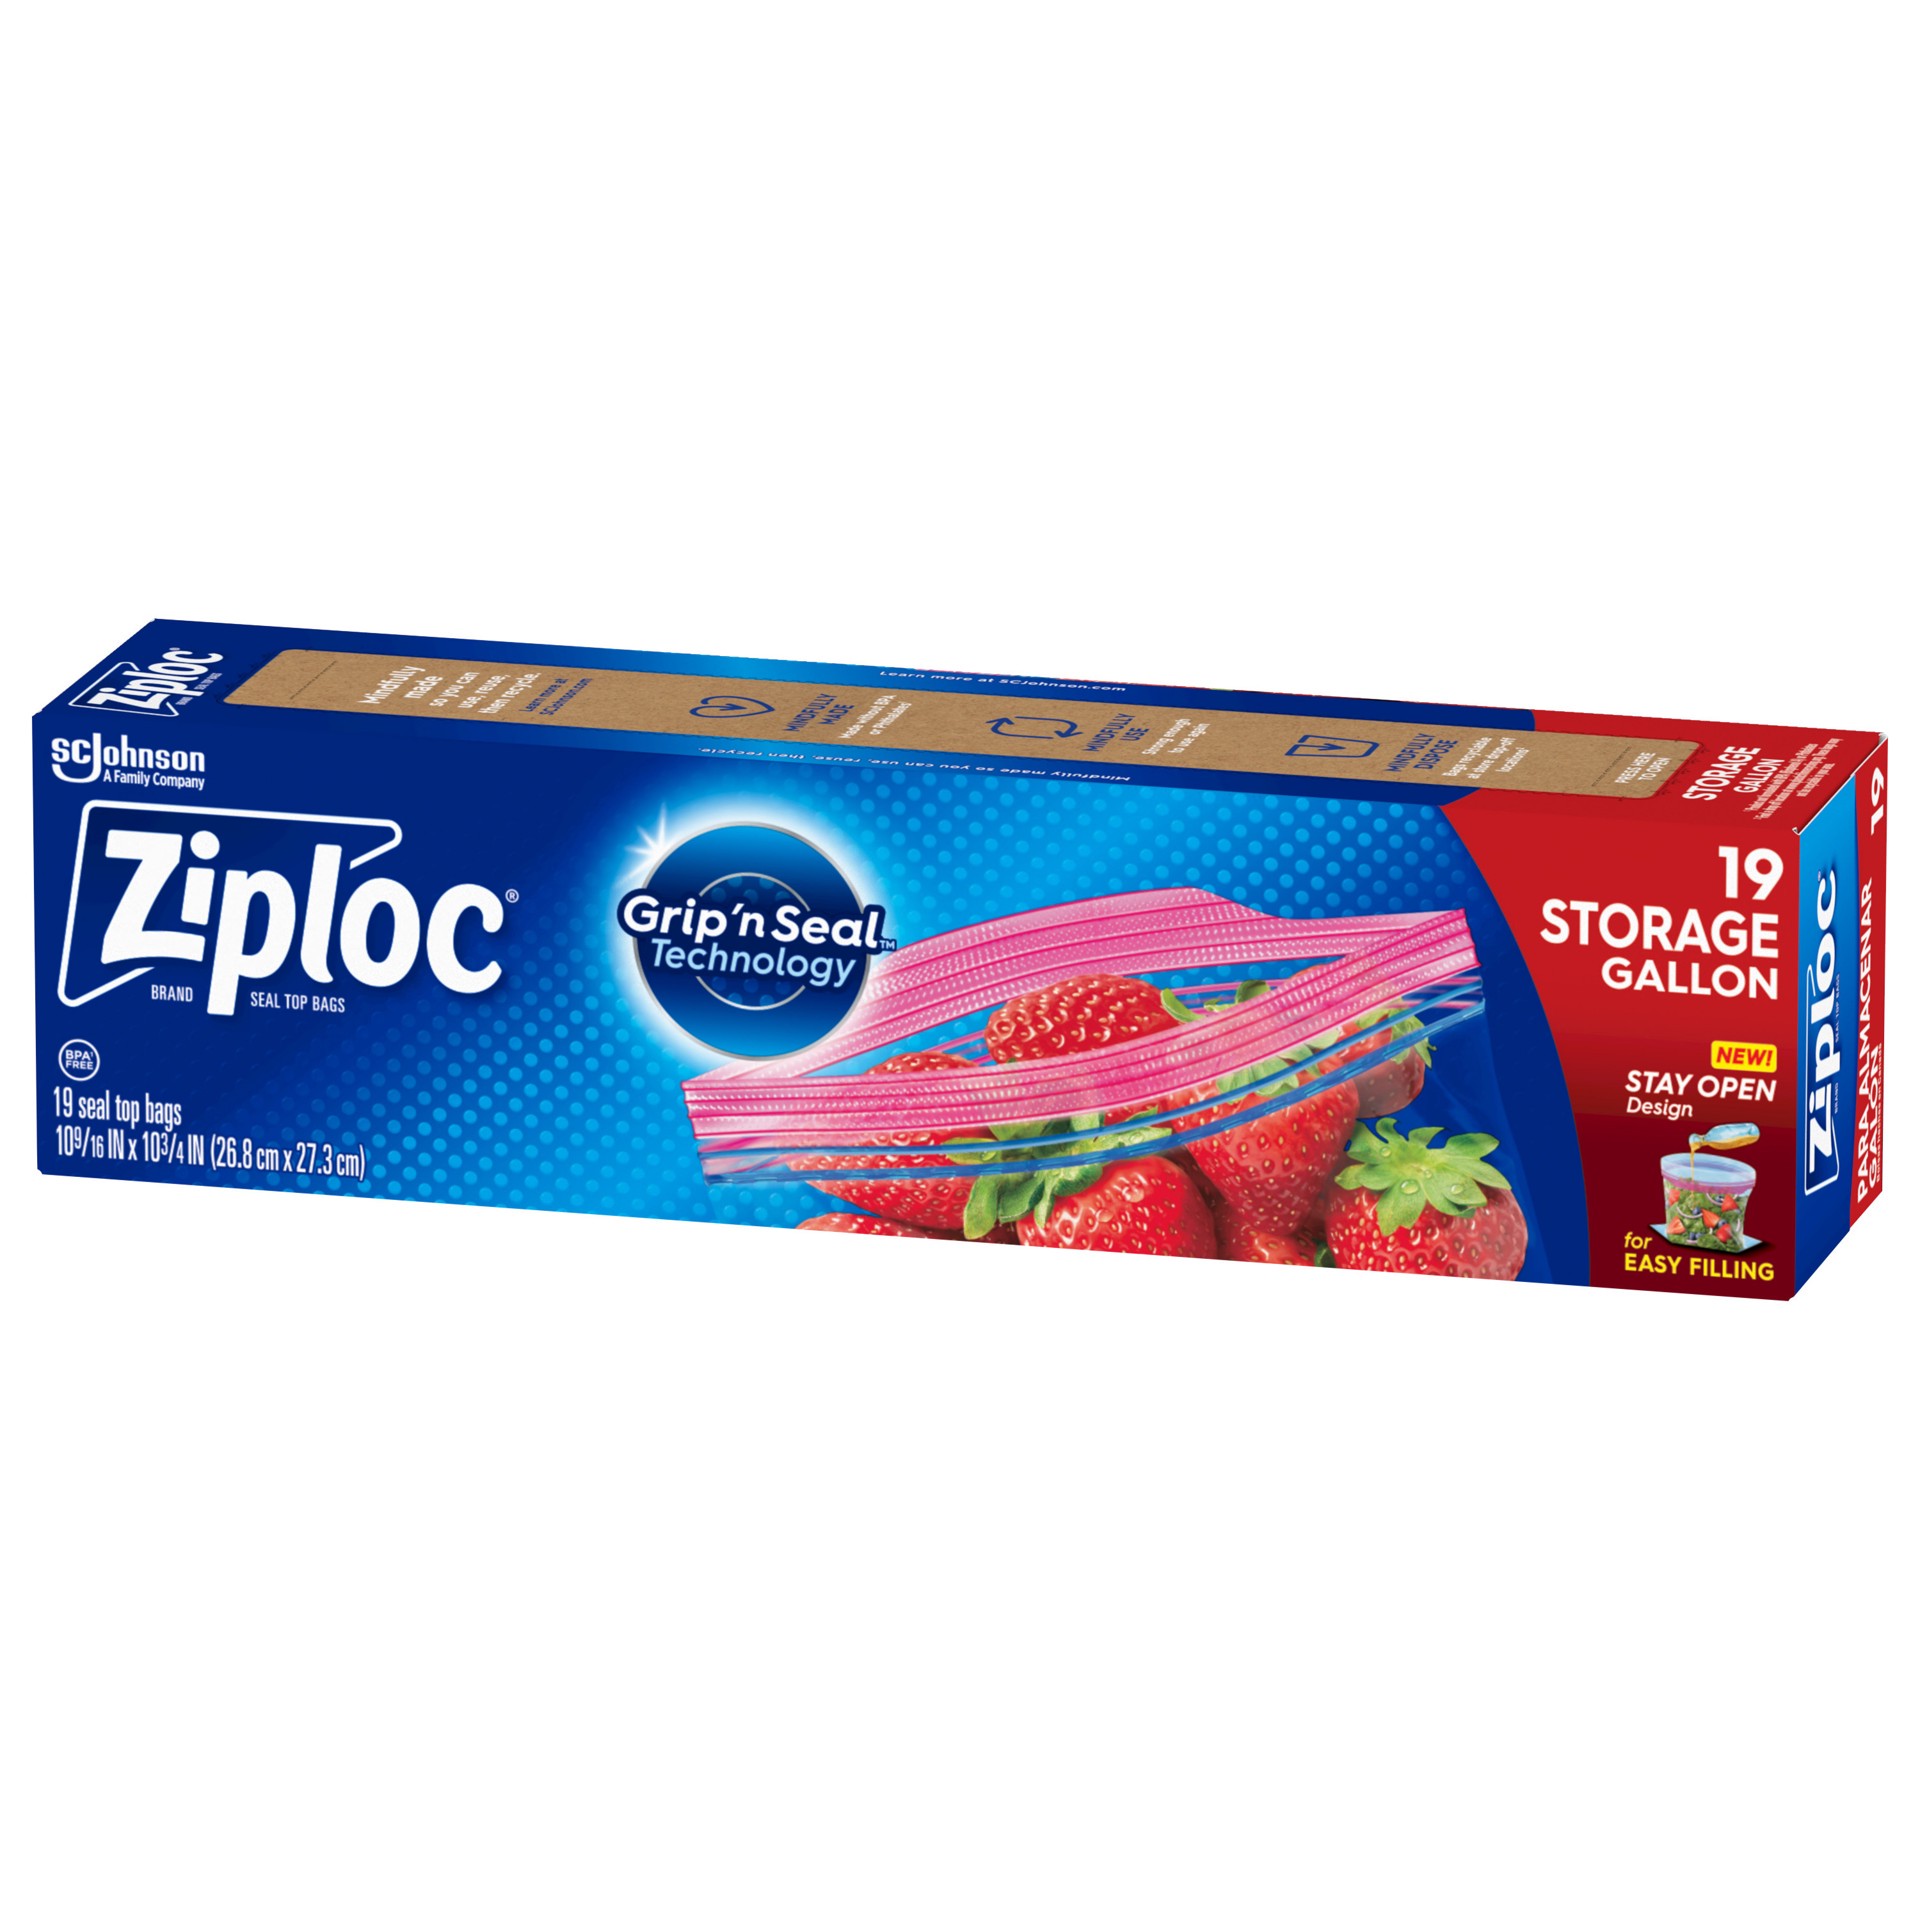 slide 2 of 5, Ziploc Brand Storage Bags with New Stay Open Design, Gallon, 19 Count, Patented Stand-up Bottom, Easy to Fill Food Storage Bags, Unloc a Free Set of Hands in the Kitchen, Microwave Safe, BPA Free, 19 ct